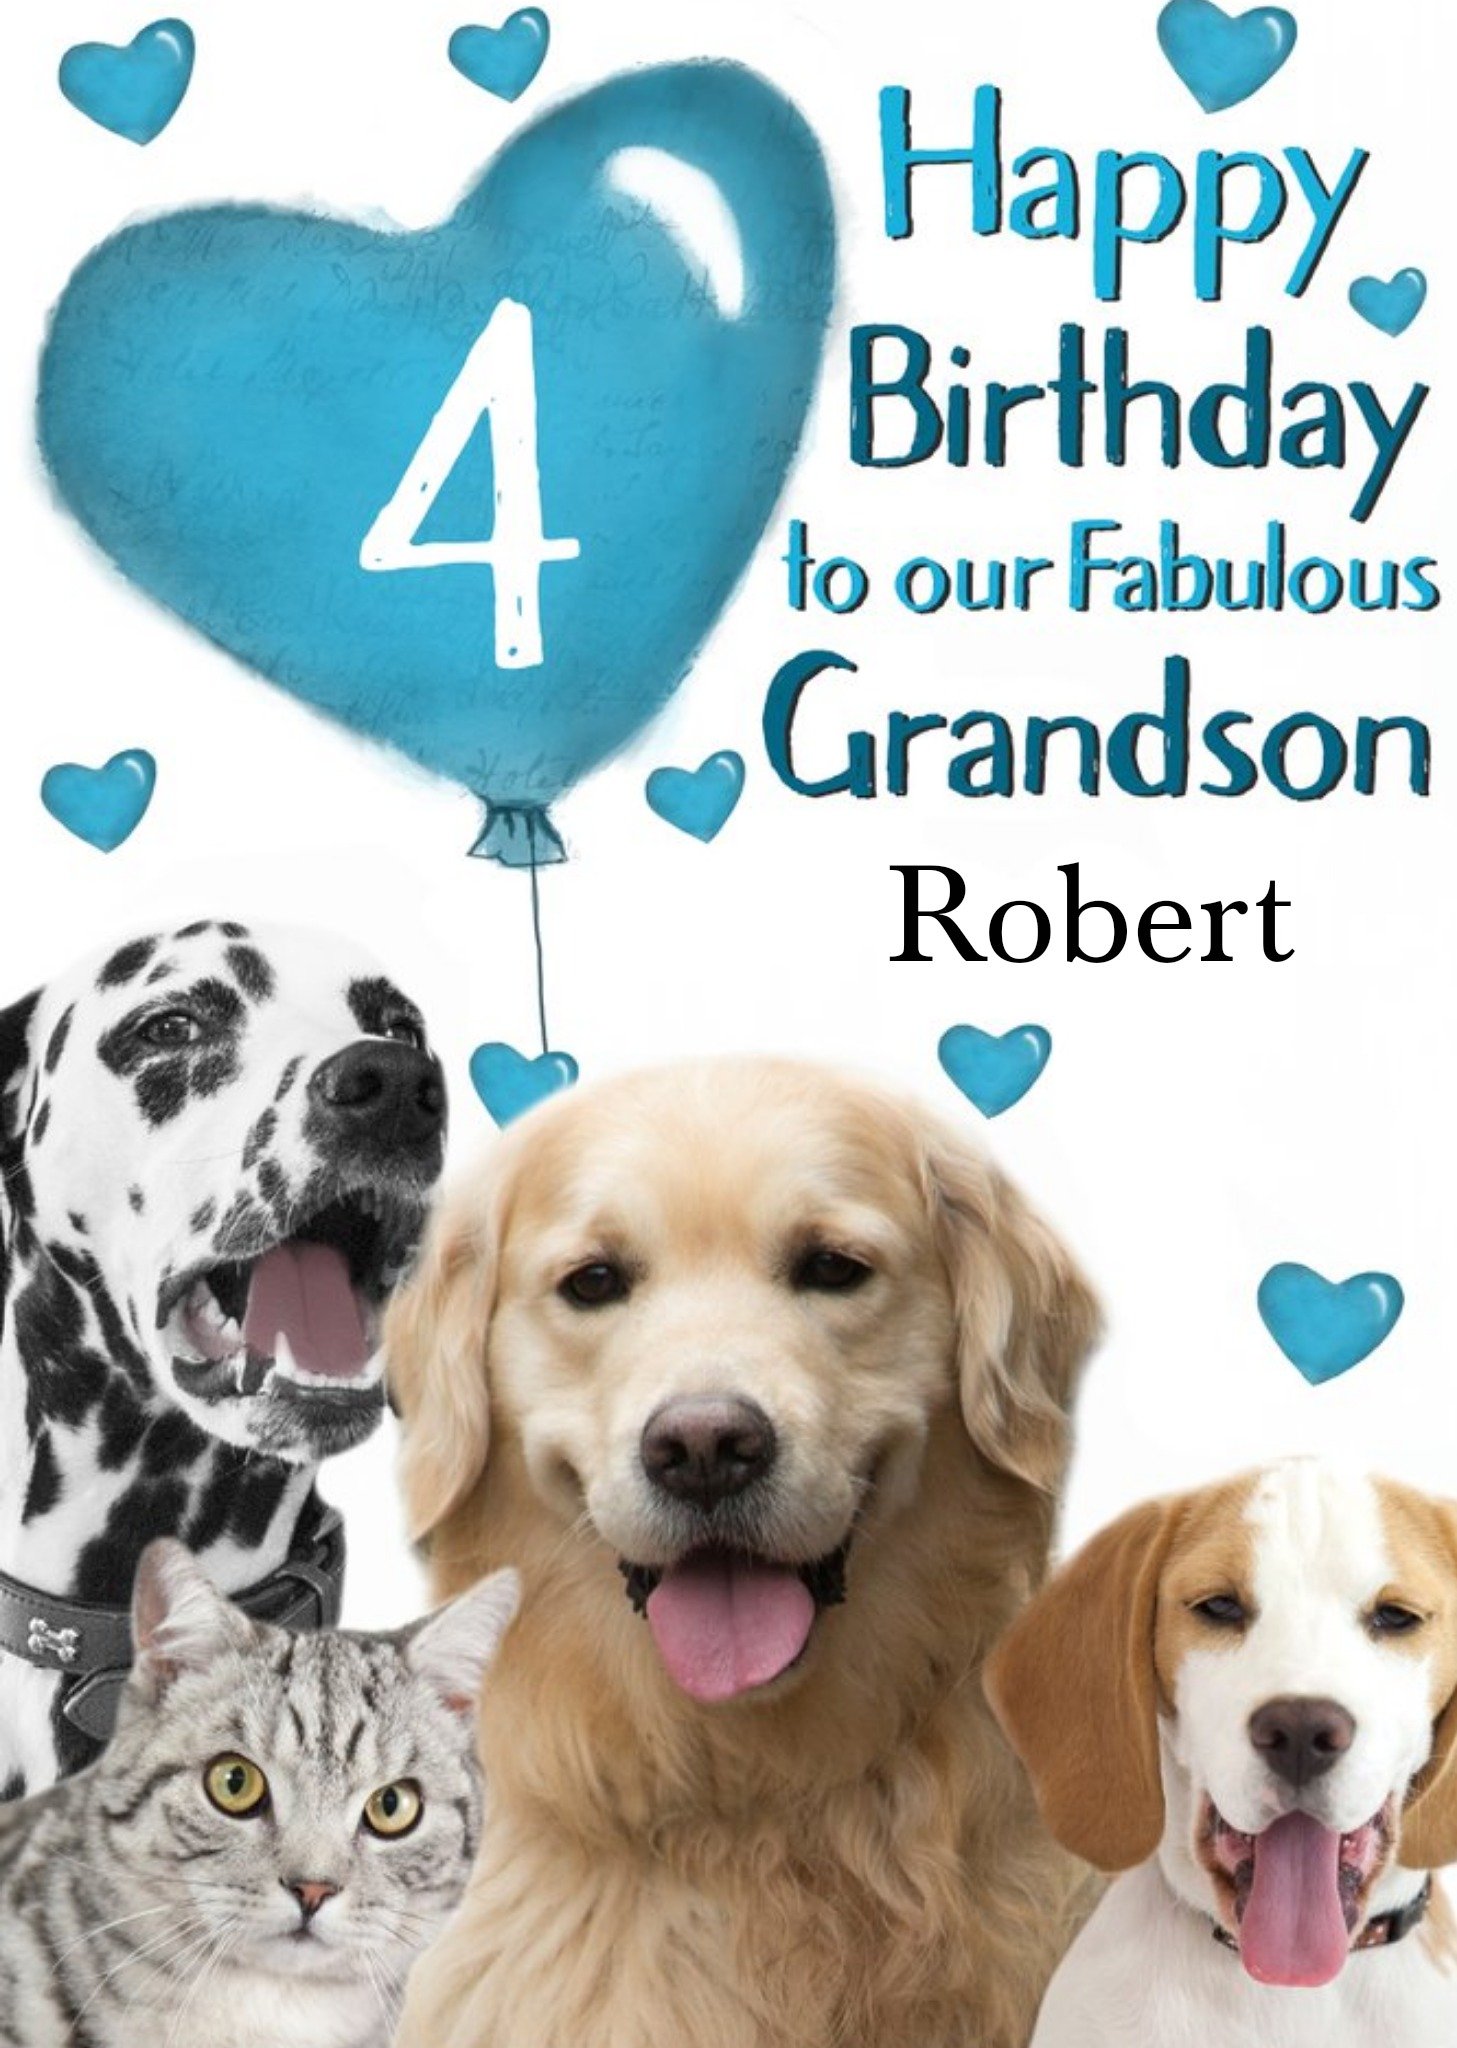 Moonpig Photo Of Cats And Dogs With Birthday Balloon Grandson 4th Birthday Card, Large